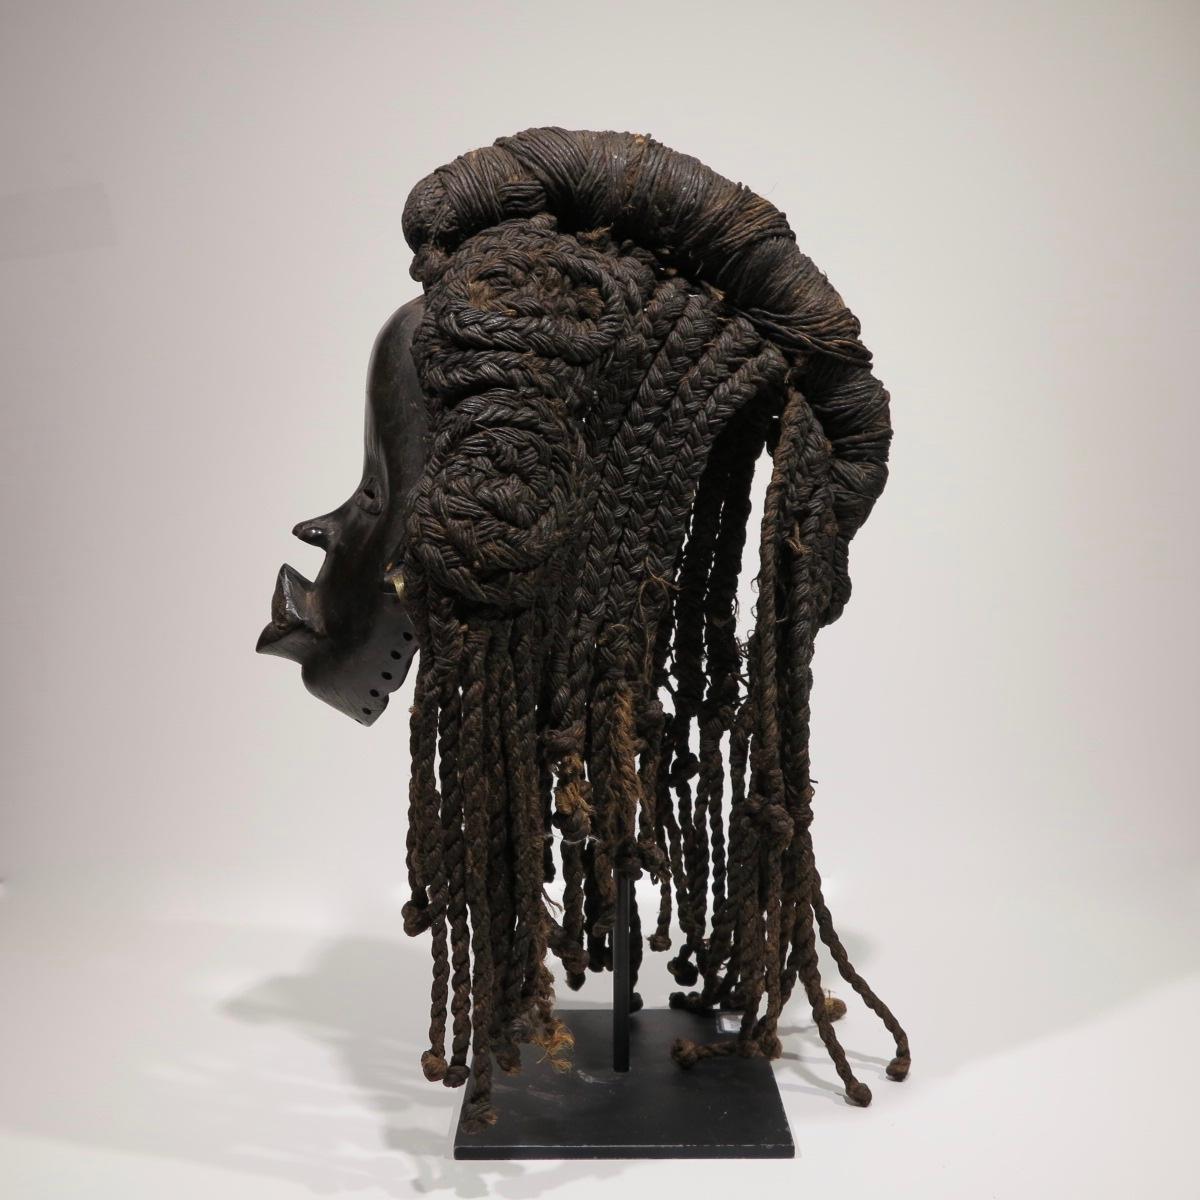 Beautiful 20th-century Dan Mask. Carved wood,  Liberia. Face measures 8.25 x 7 x 3.75 inches. Complete with attached rope and beeswax wig, measures 14 x 9 x 12.5 inches. Measures 18 inches tall with custom stand. 